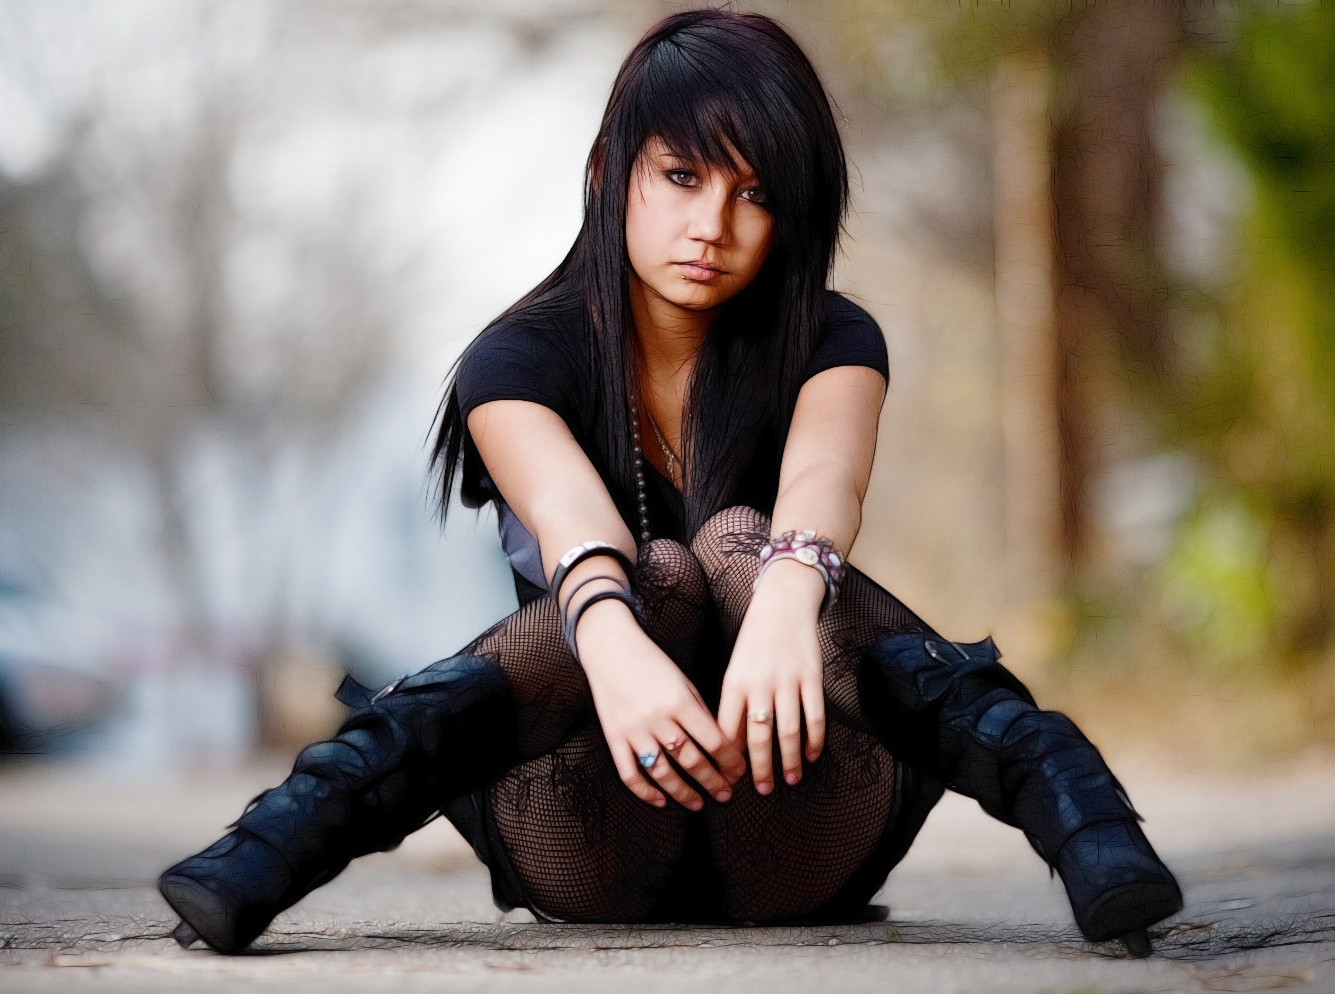 Brunette Gothic Girl wearing Black Fishnet Pantyhose and Black Boots